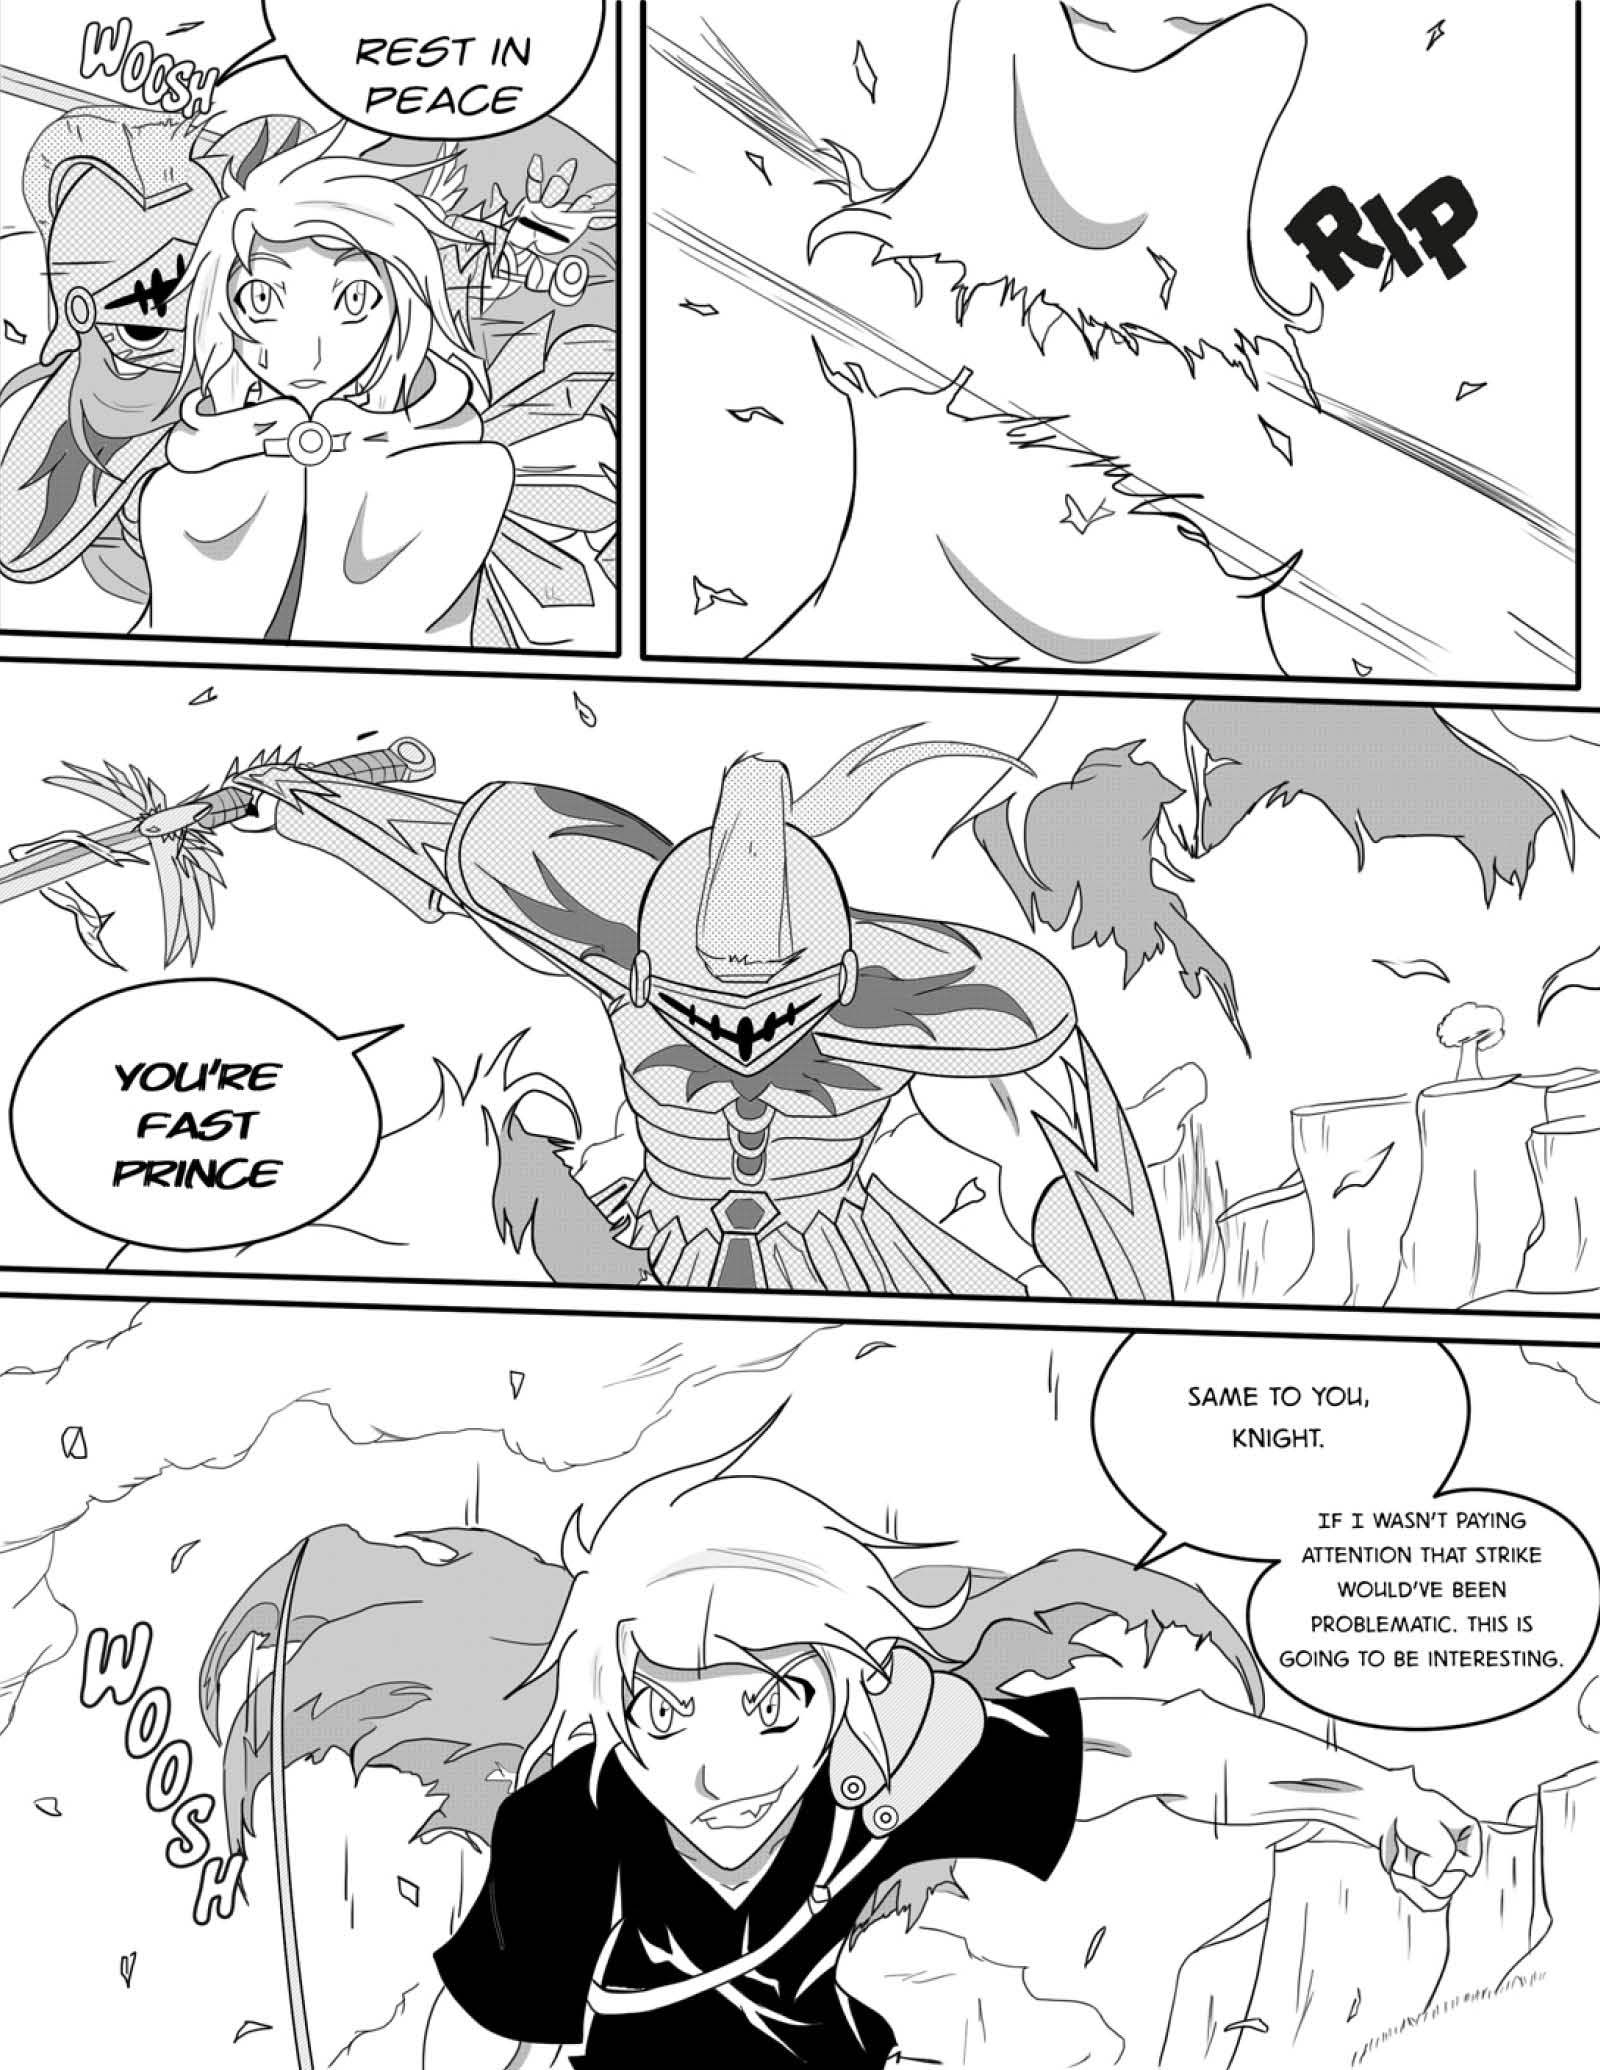 Series Dilan: the Chronicles of Covak - Chapter 4 - Page 5 - Language ENG